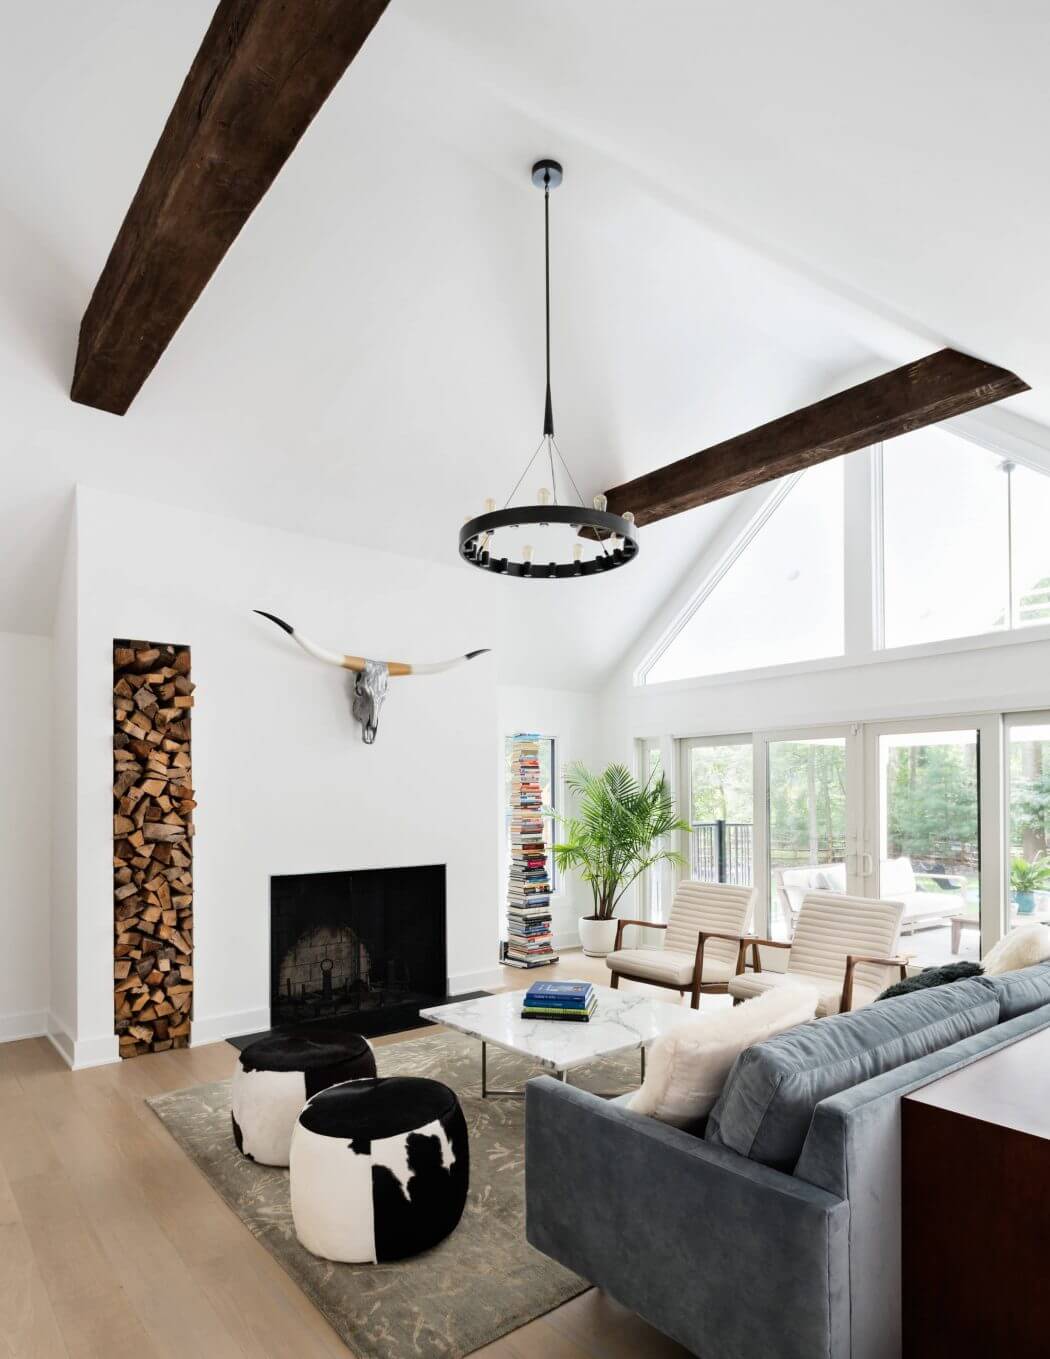 Spacious living room with high ceilings, exposed beams, and modern furniture. Fireplace and floor-to-ceiling windows.